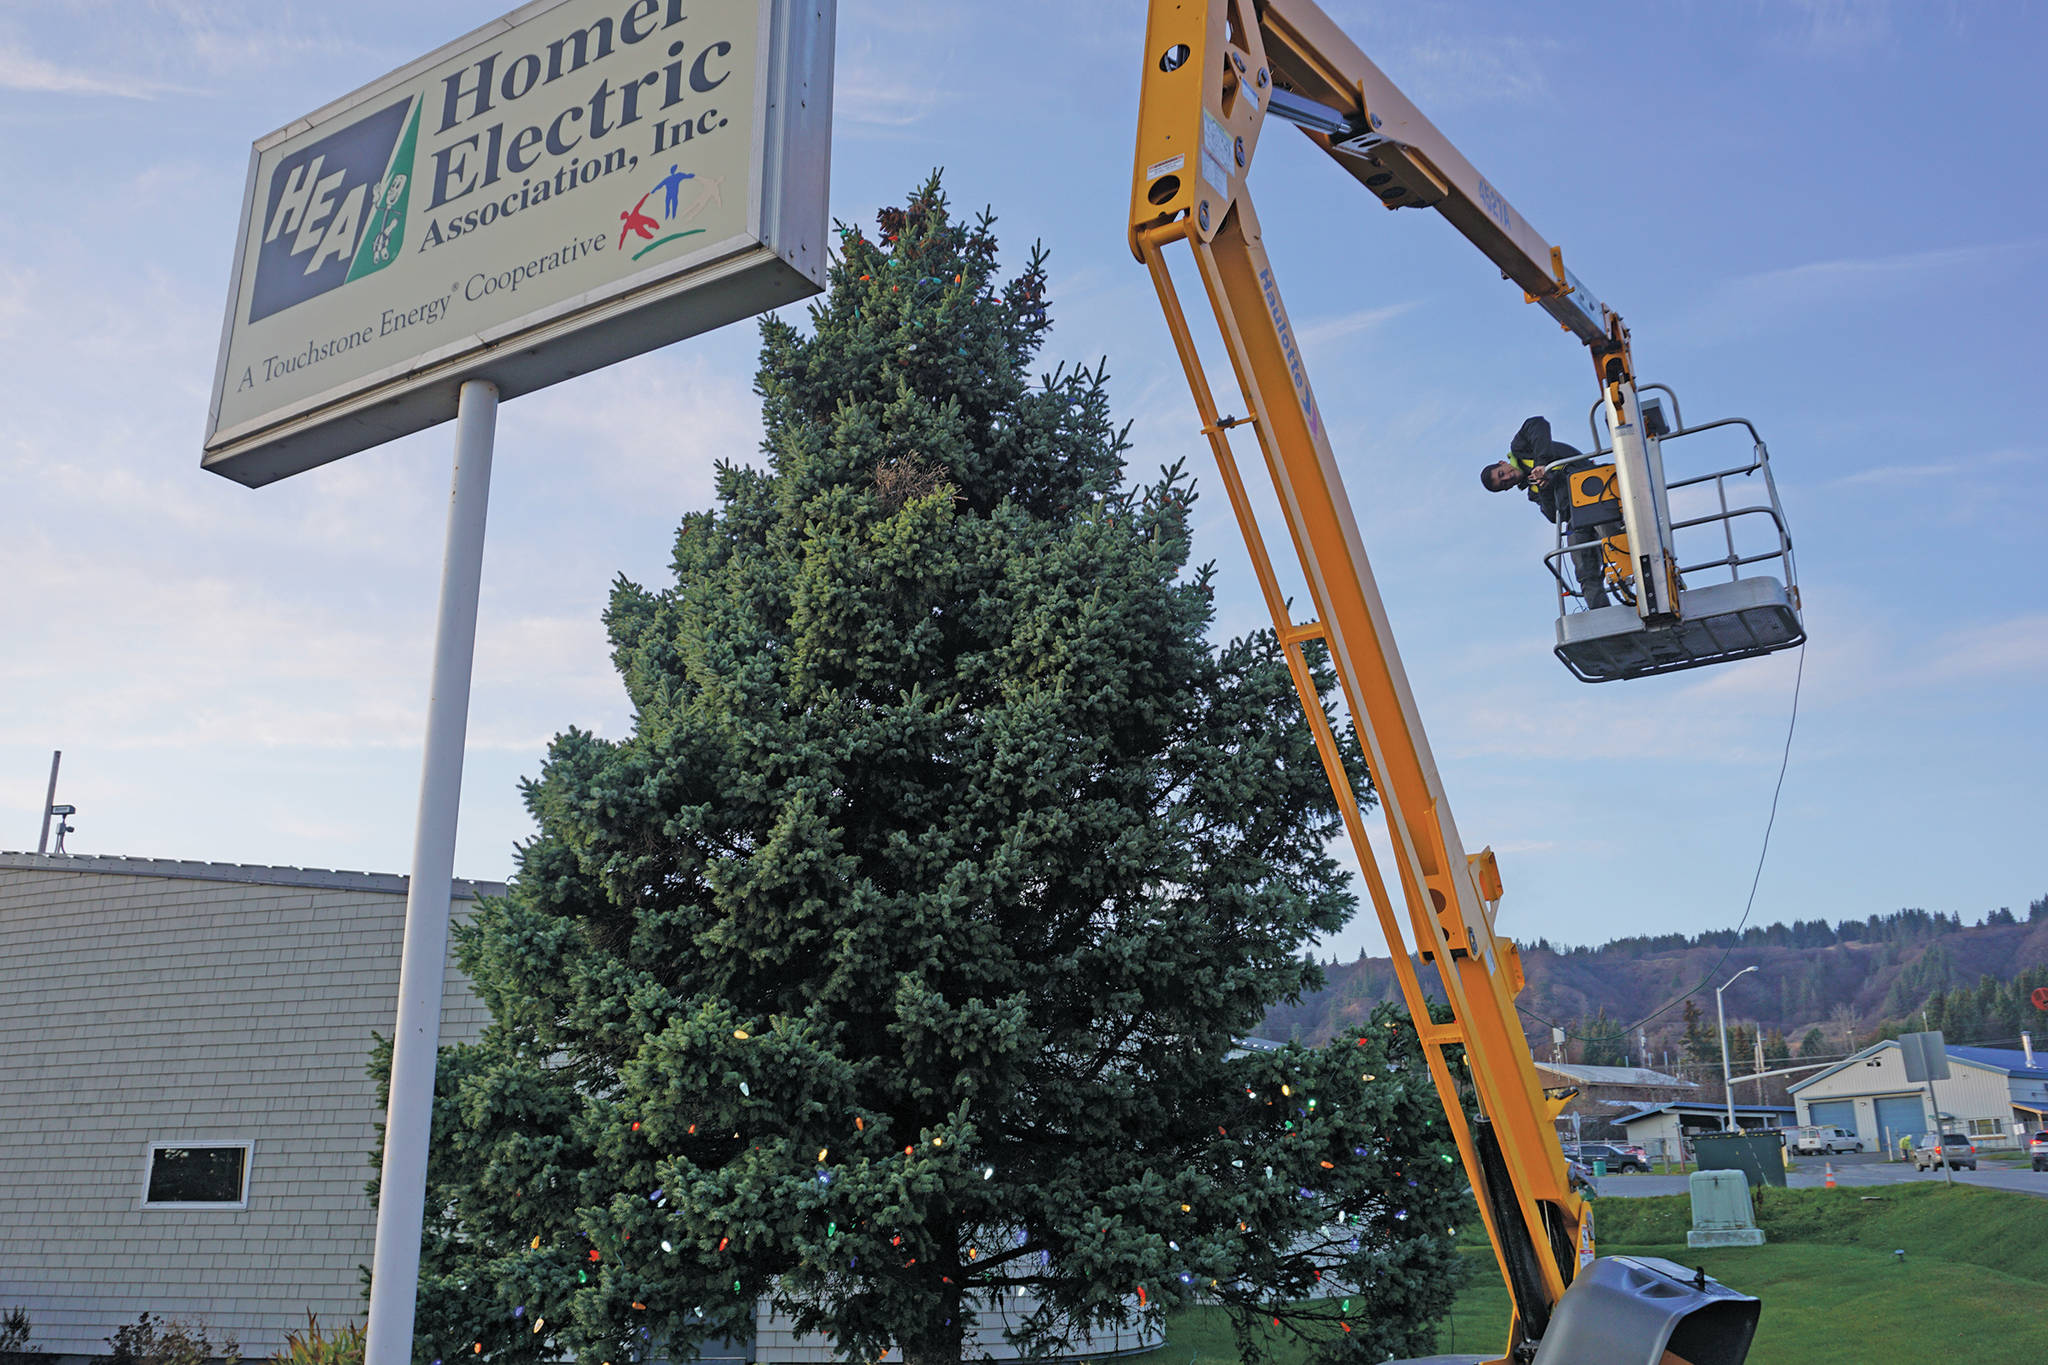 Nathan Simpson of Dutch Boy Landscaping on Nov. 14, 2019, installs colored lights on the tree by Homer Electric Association in Homer, Alaska. The big tree by HEA is one of Homer’s landmark holiday decorated trees. (Photo by Michael Armstrong/Homer News)